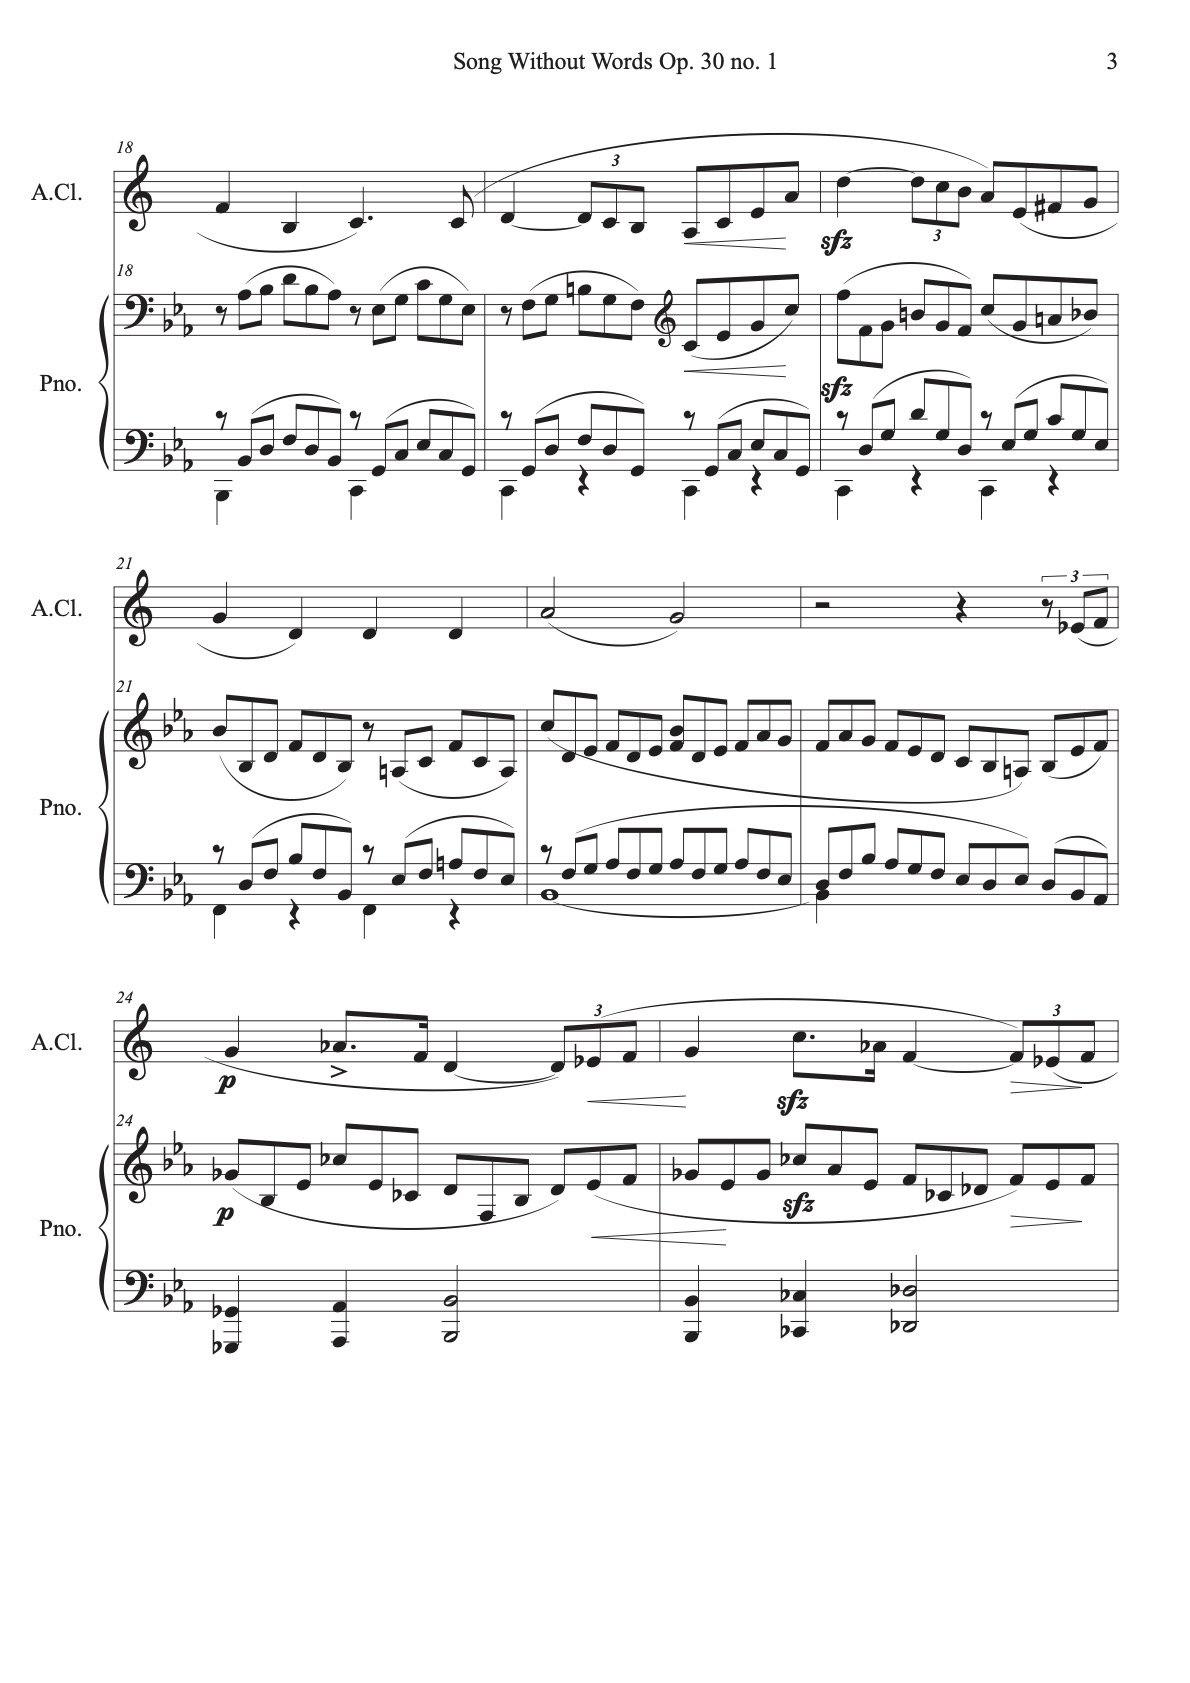 Alto Clarinet and Piano : Songs Without Words Op. 30 no. 1 - ChaipruckMekara